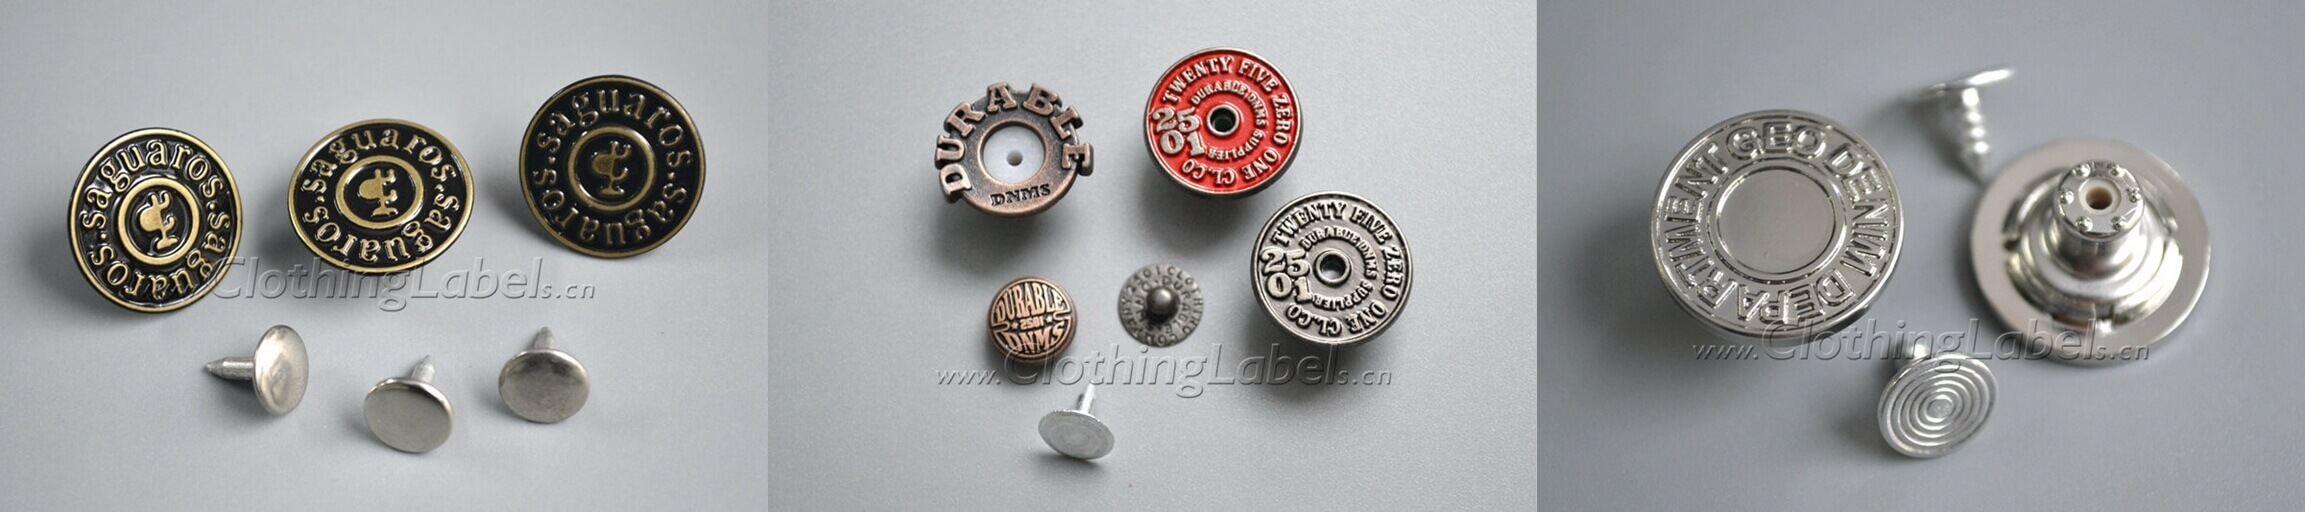 samples of jeans buttons and rivets